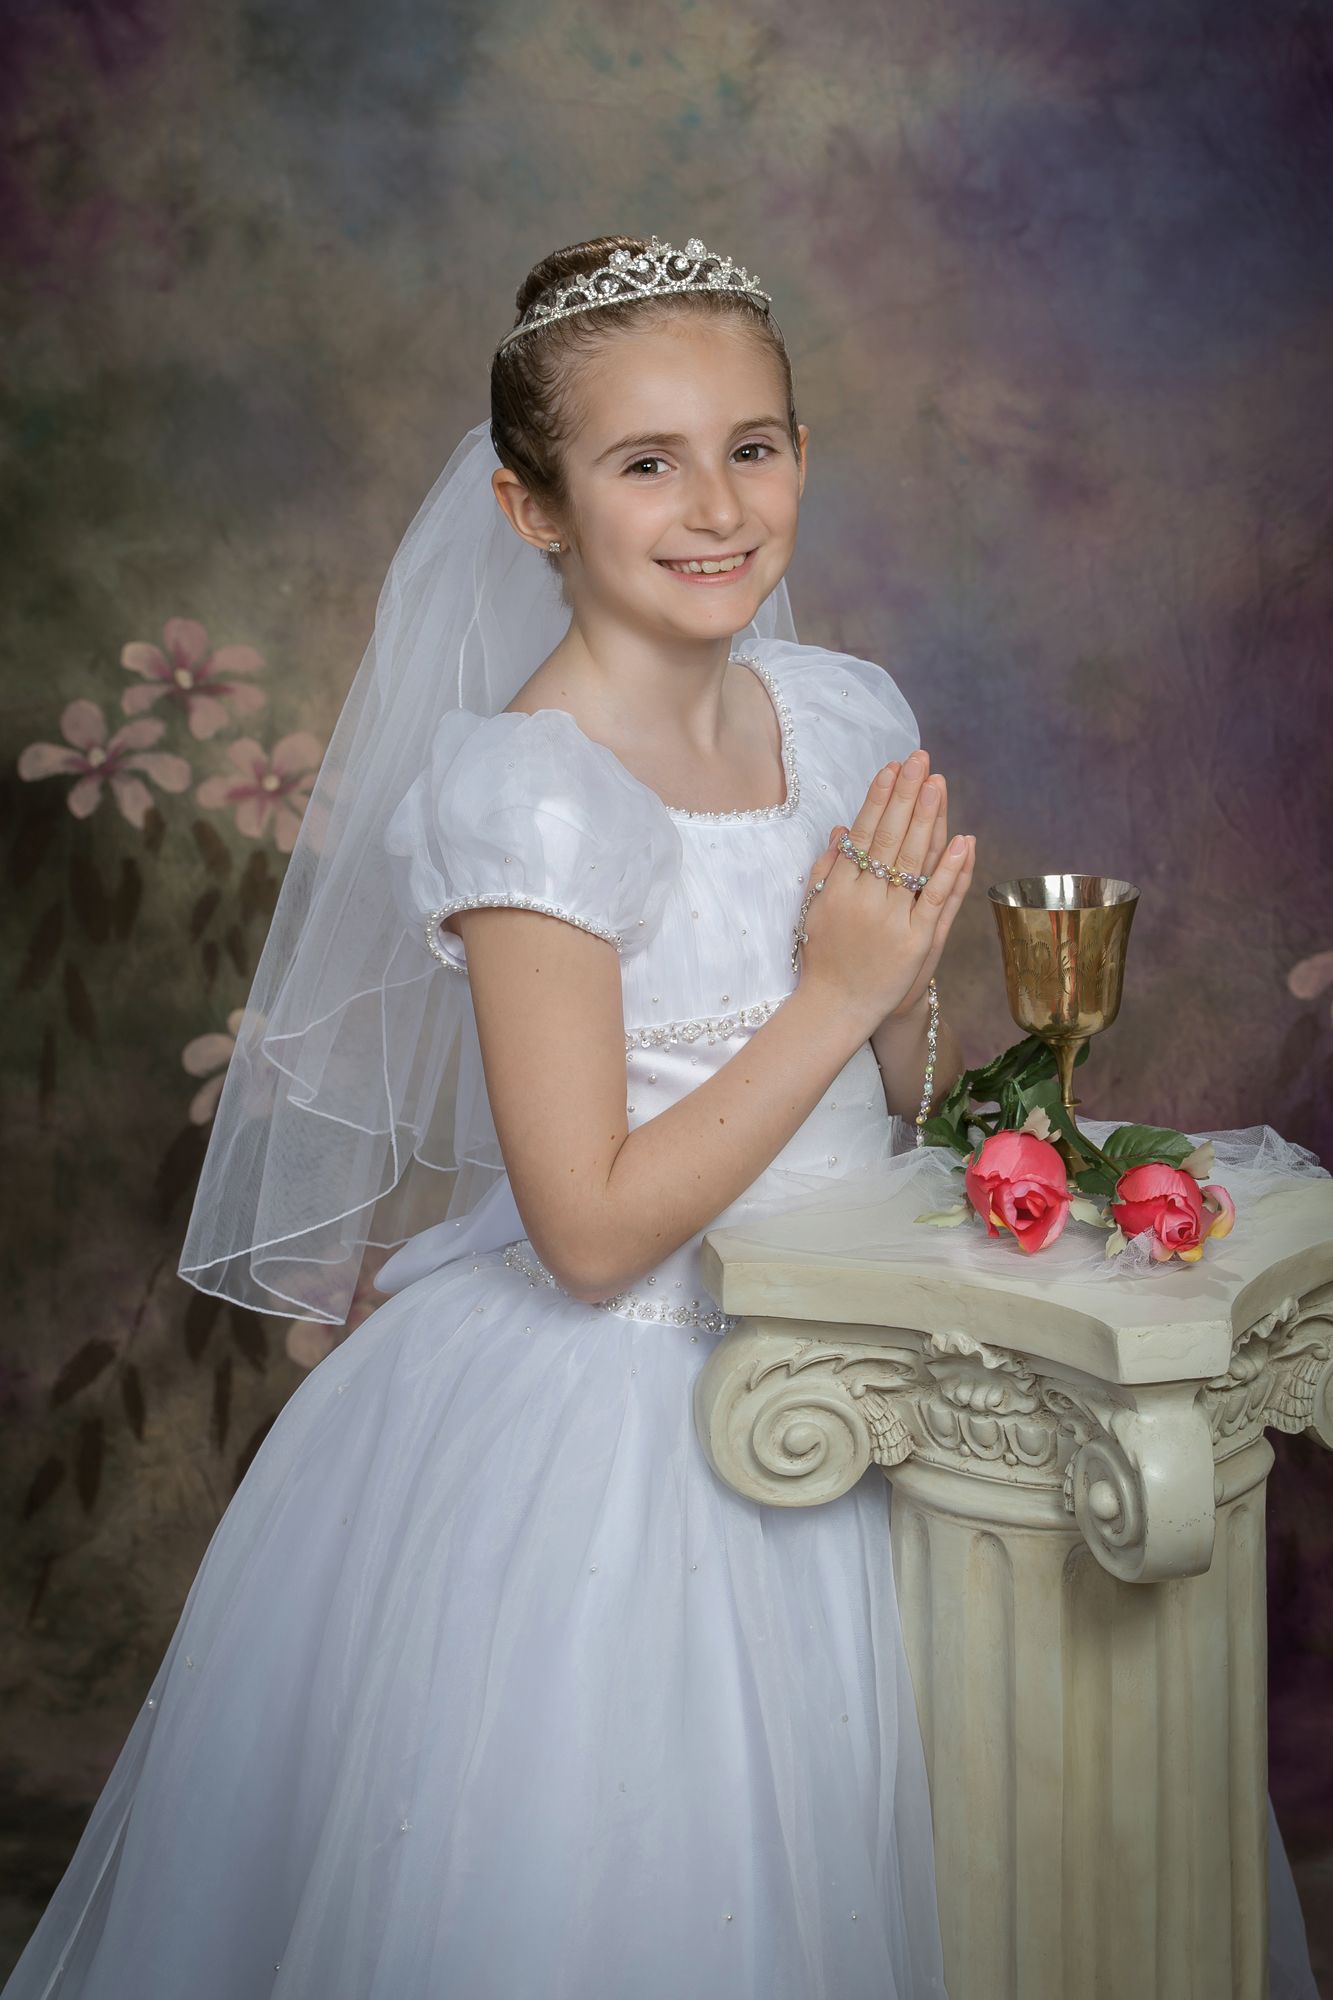 Communion Photographer in Our lady of the Lakes Medford New Jersey